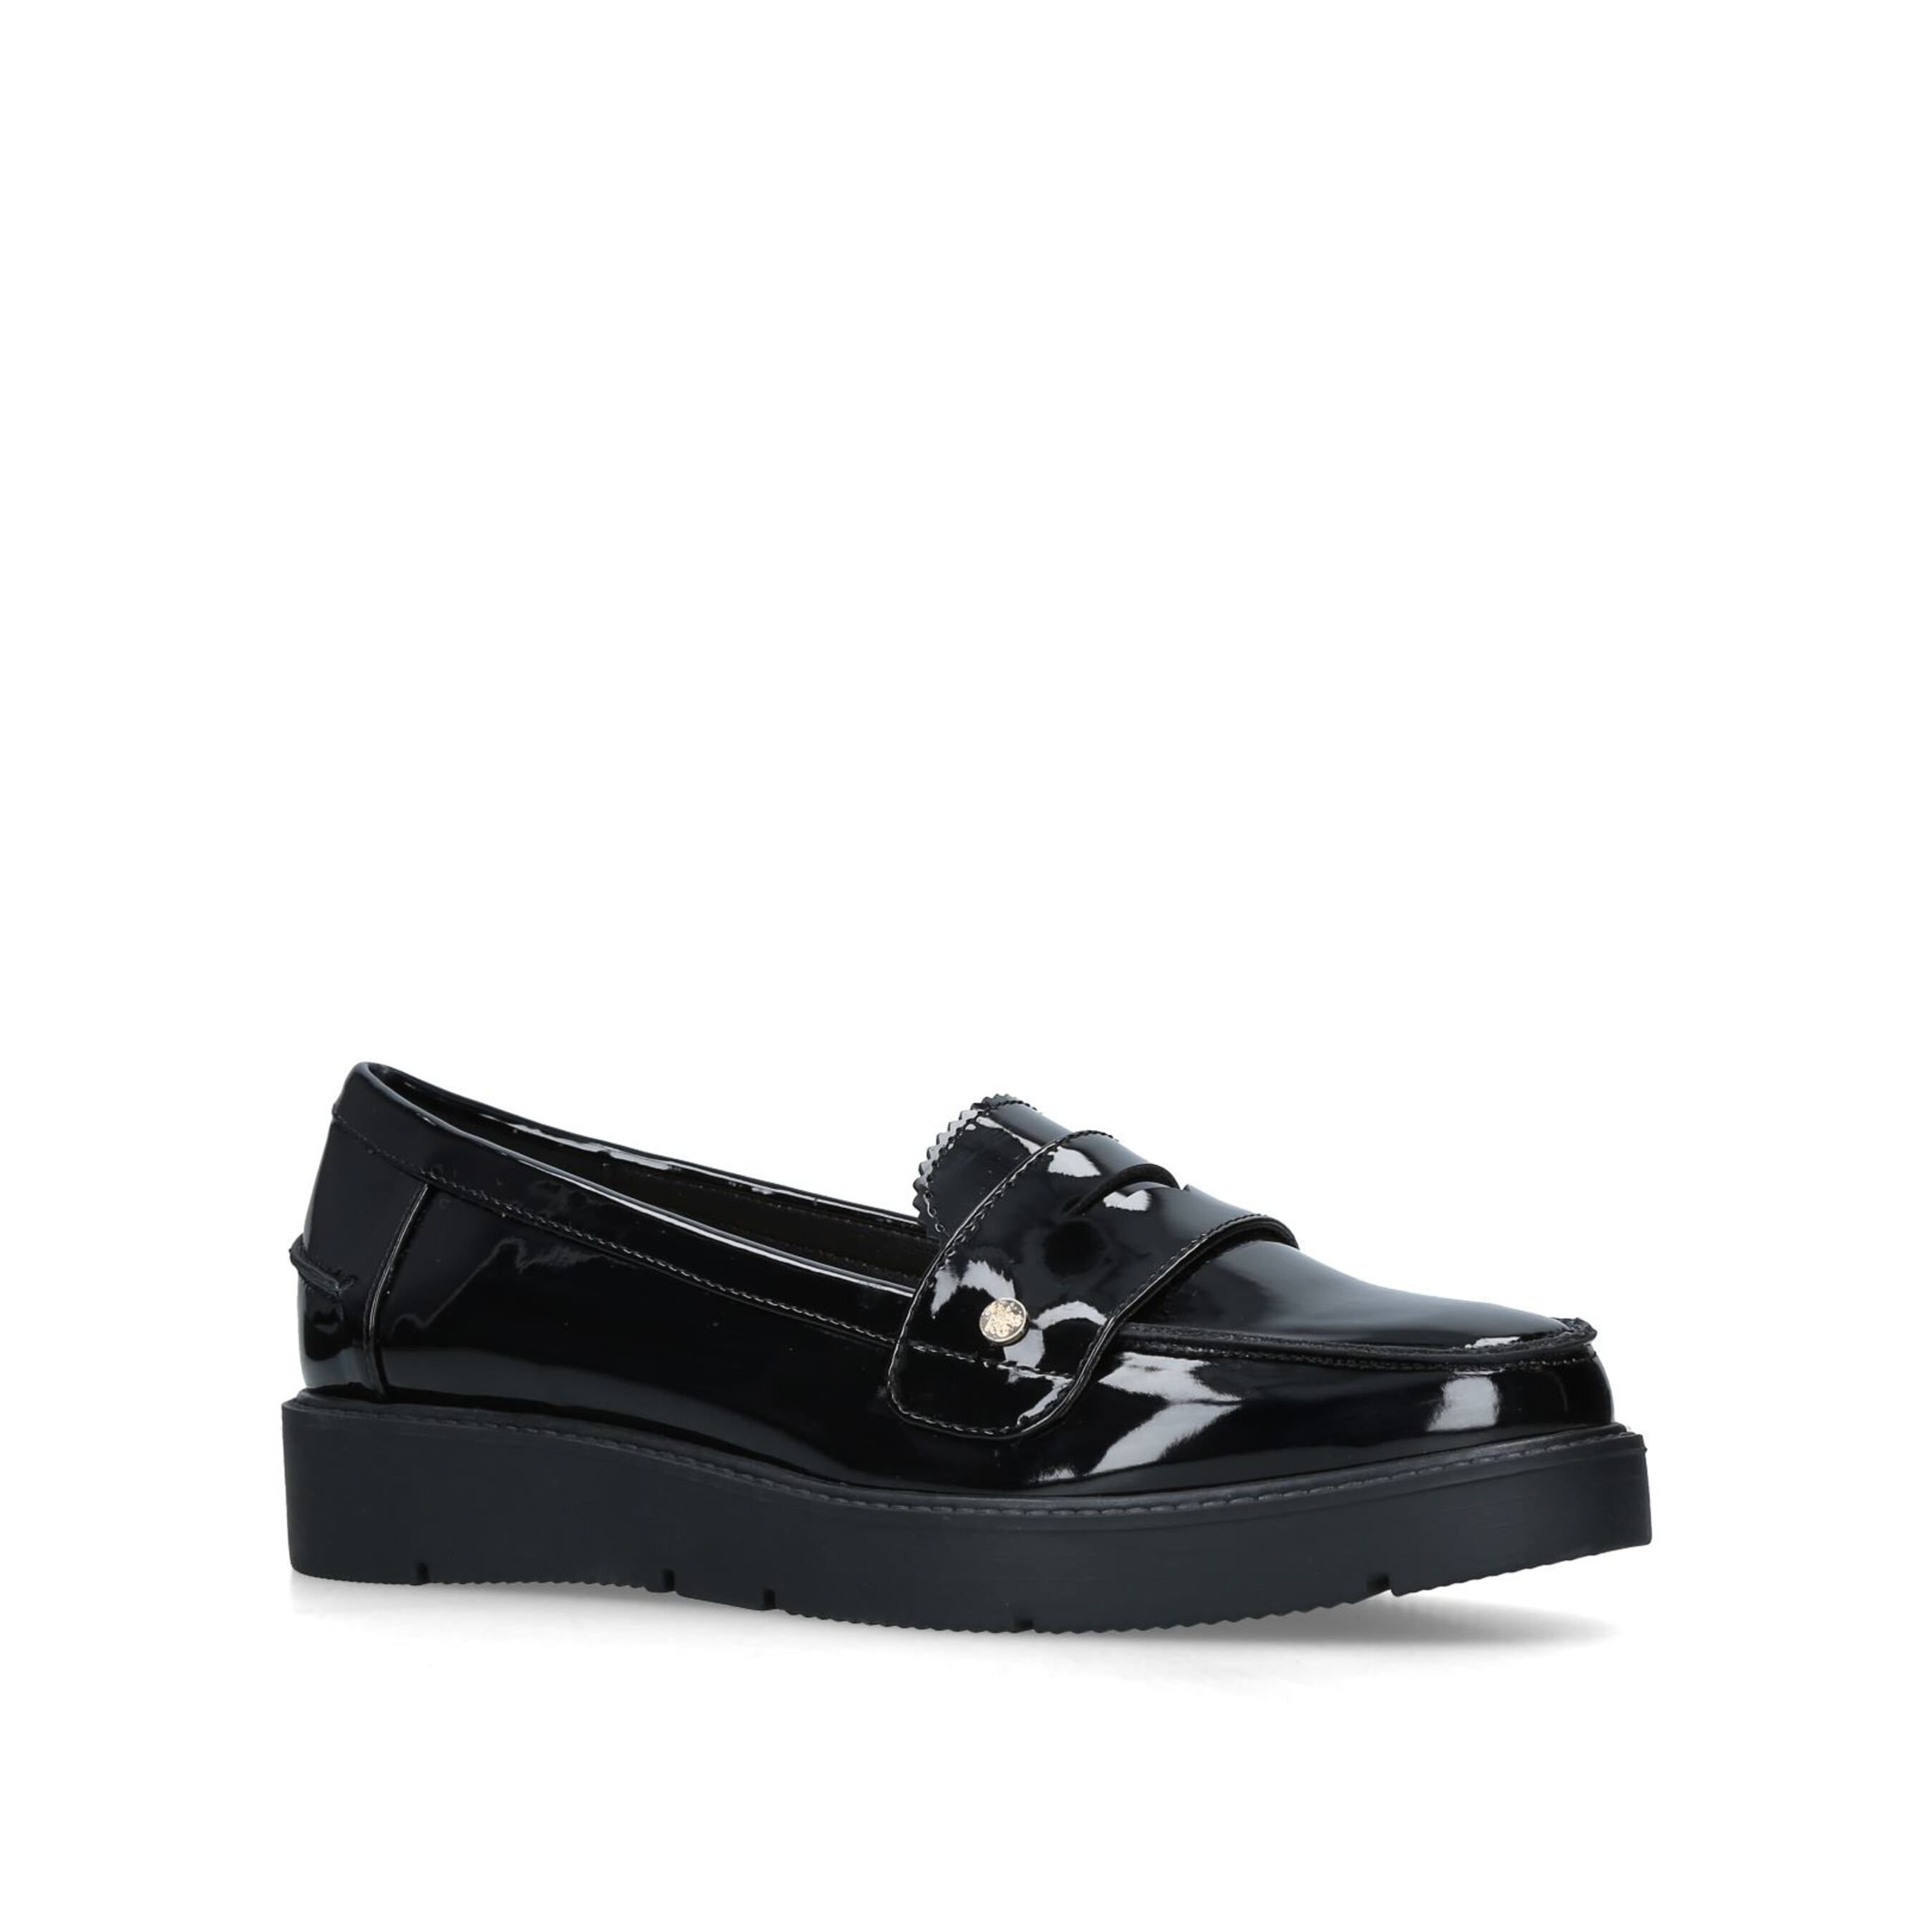 Work some polish into your professional looks with Miss KG's seductive Nieve loafer. This easy slip-on style is crafted in glossy black patent with a hardware pin and a touch of height hidden in the platform sole.